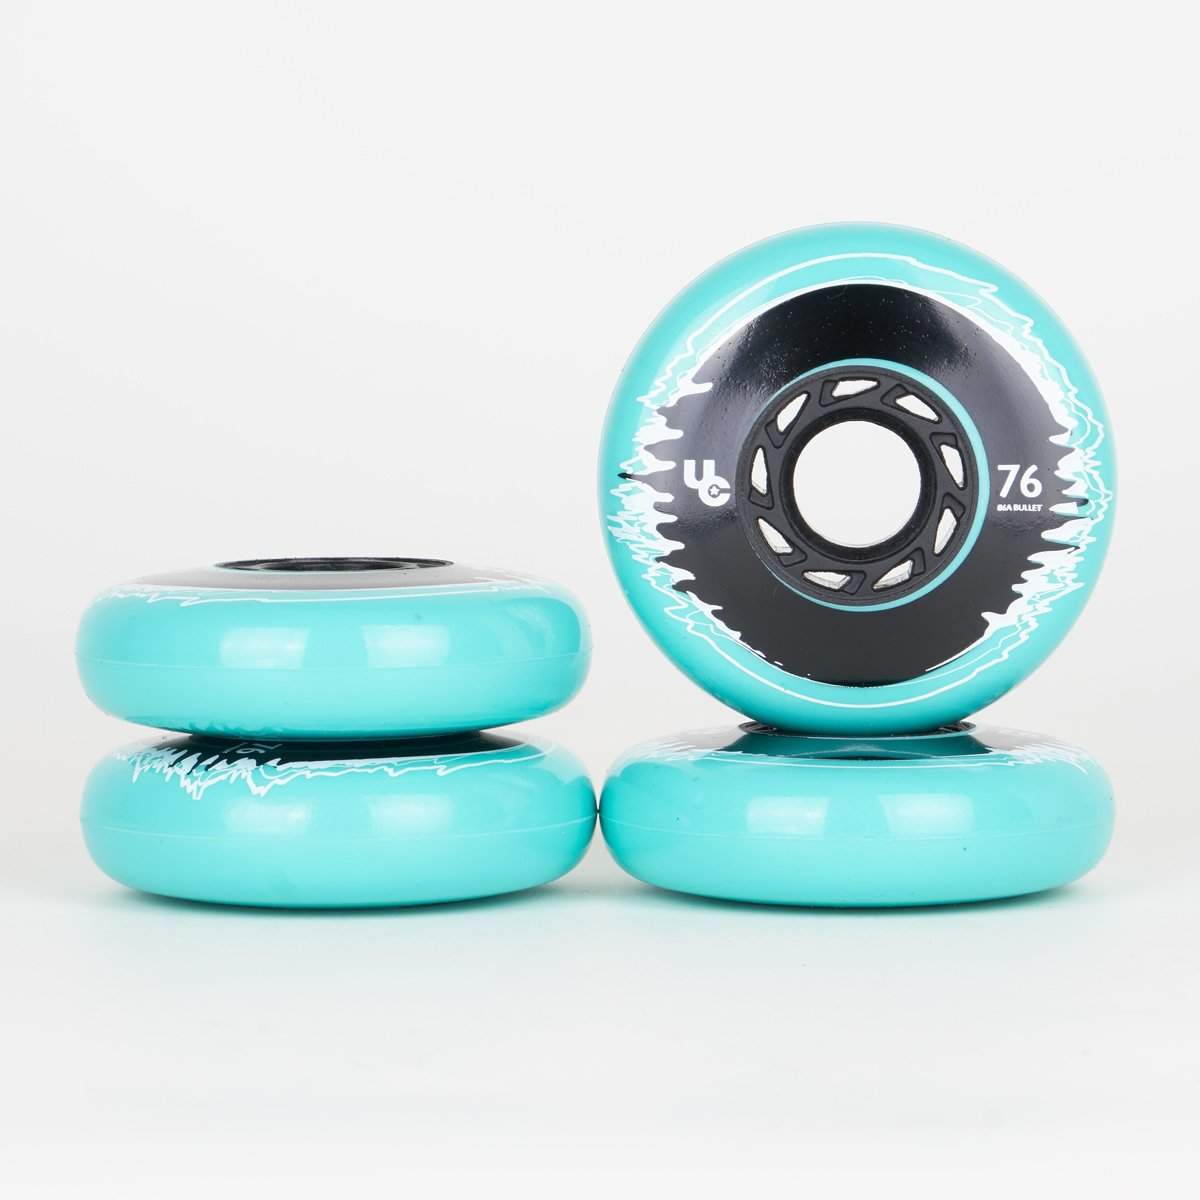 Undercover Cosmic Interference Wheels 76mm -86a - Teal / Black - 4 Pack